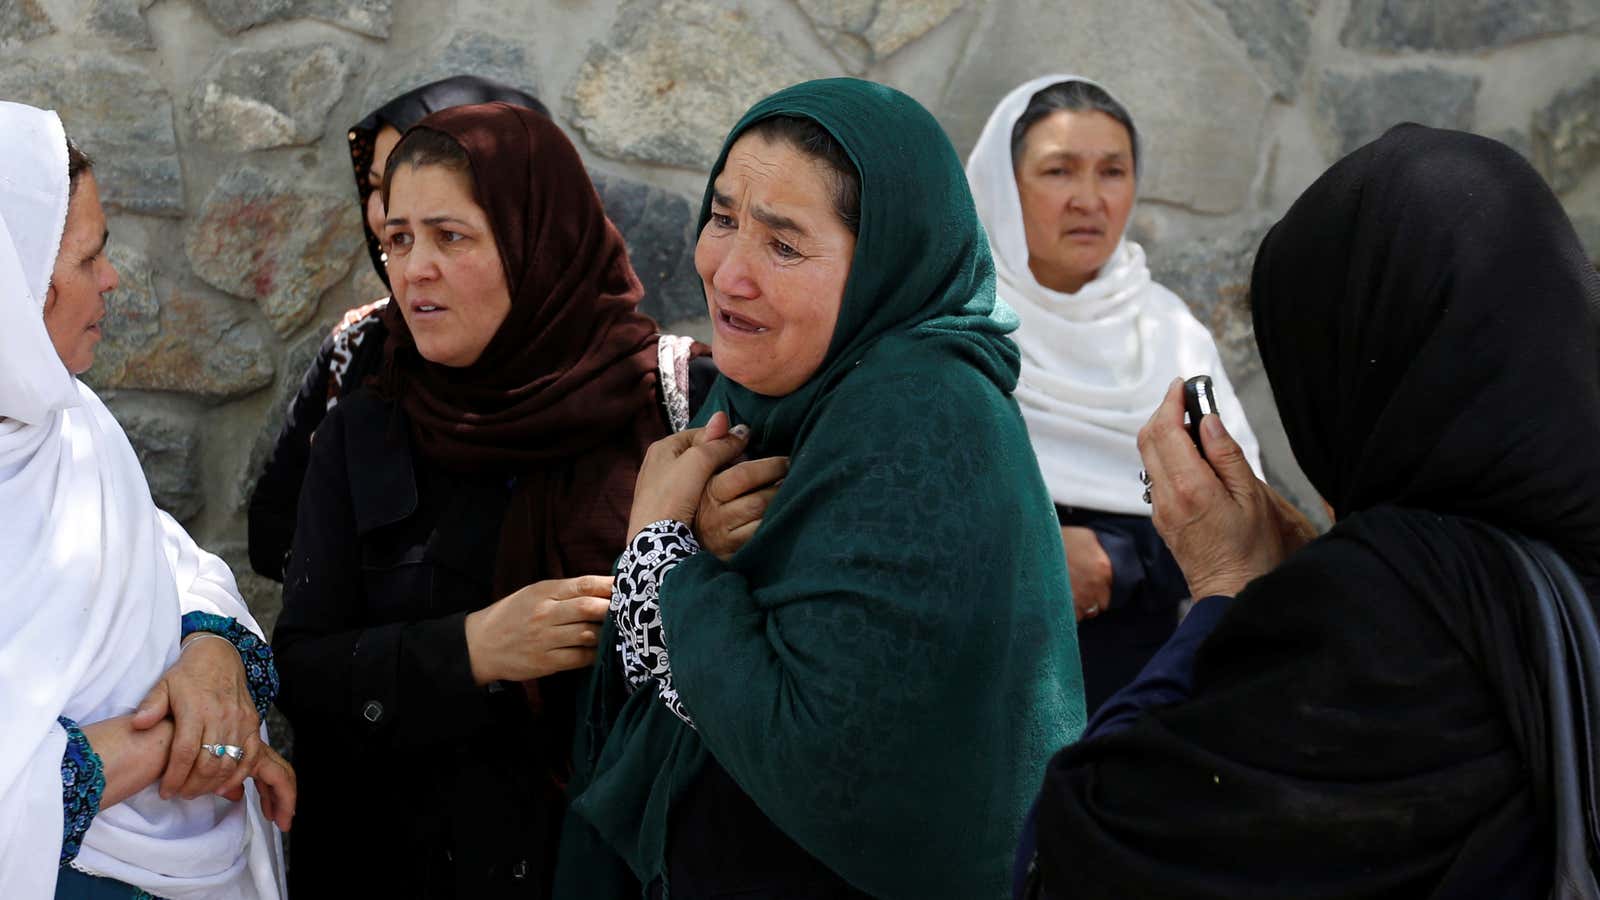 Afghan women mourn outside a hospital after a blast in Kabul, Afghanistan May 31, 2017.